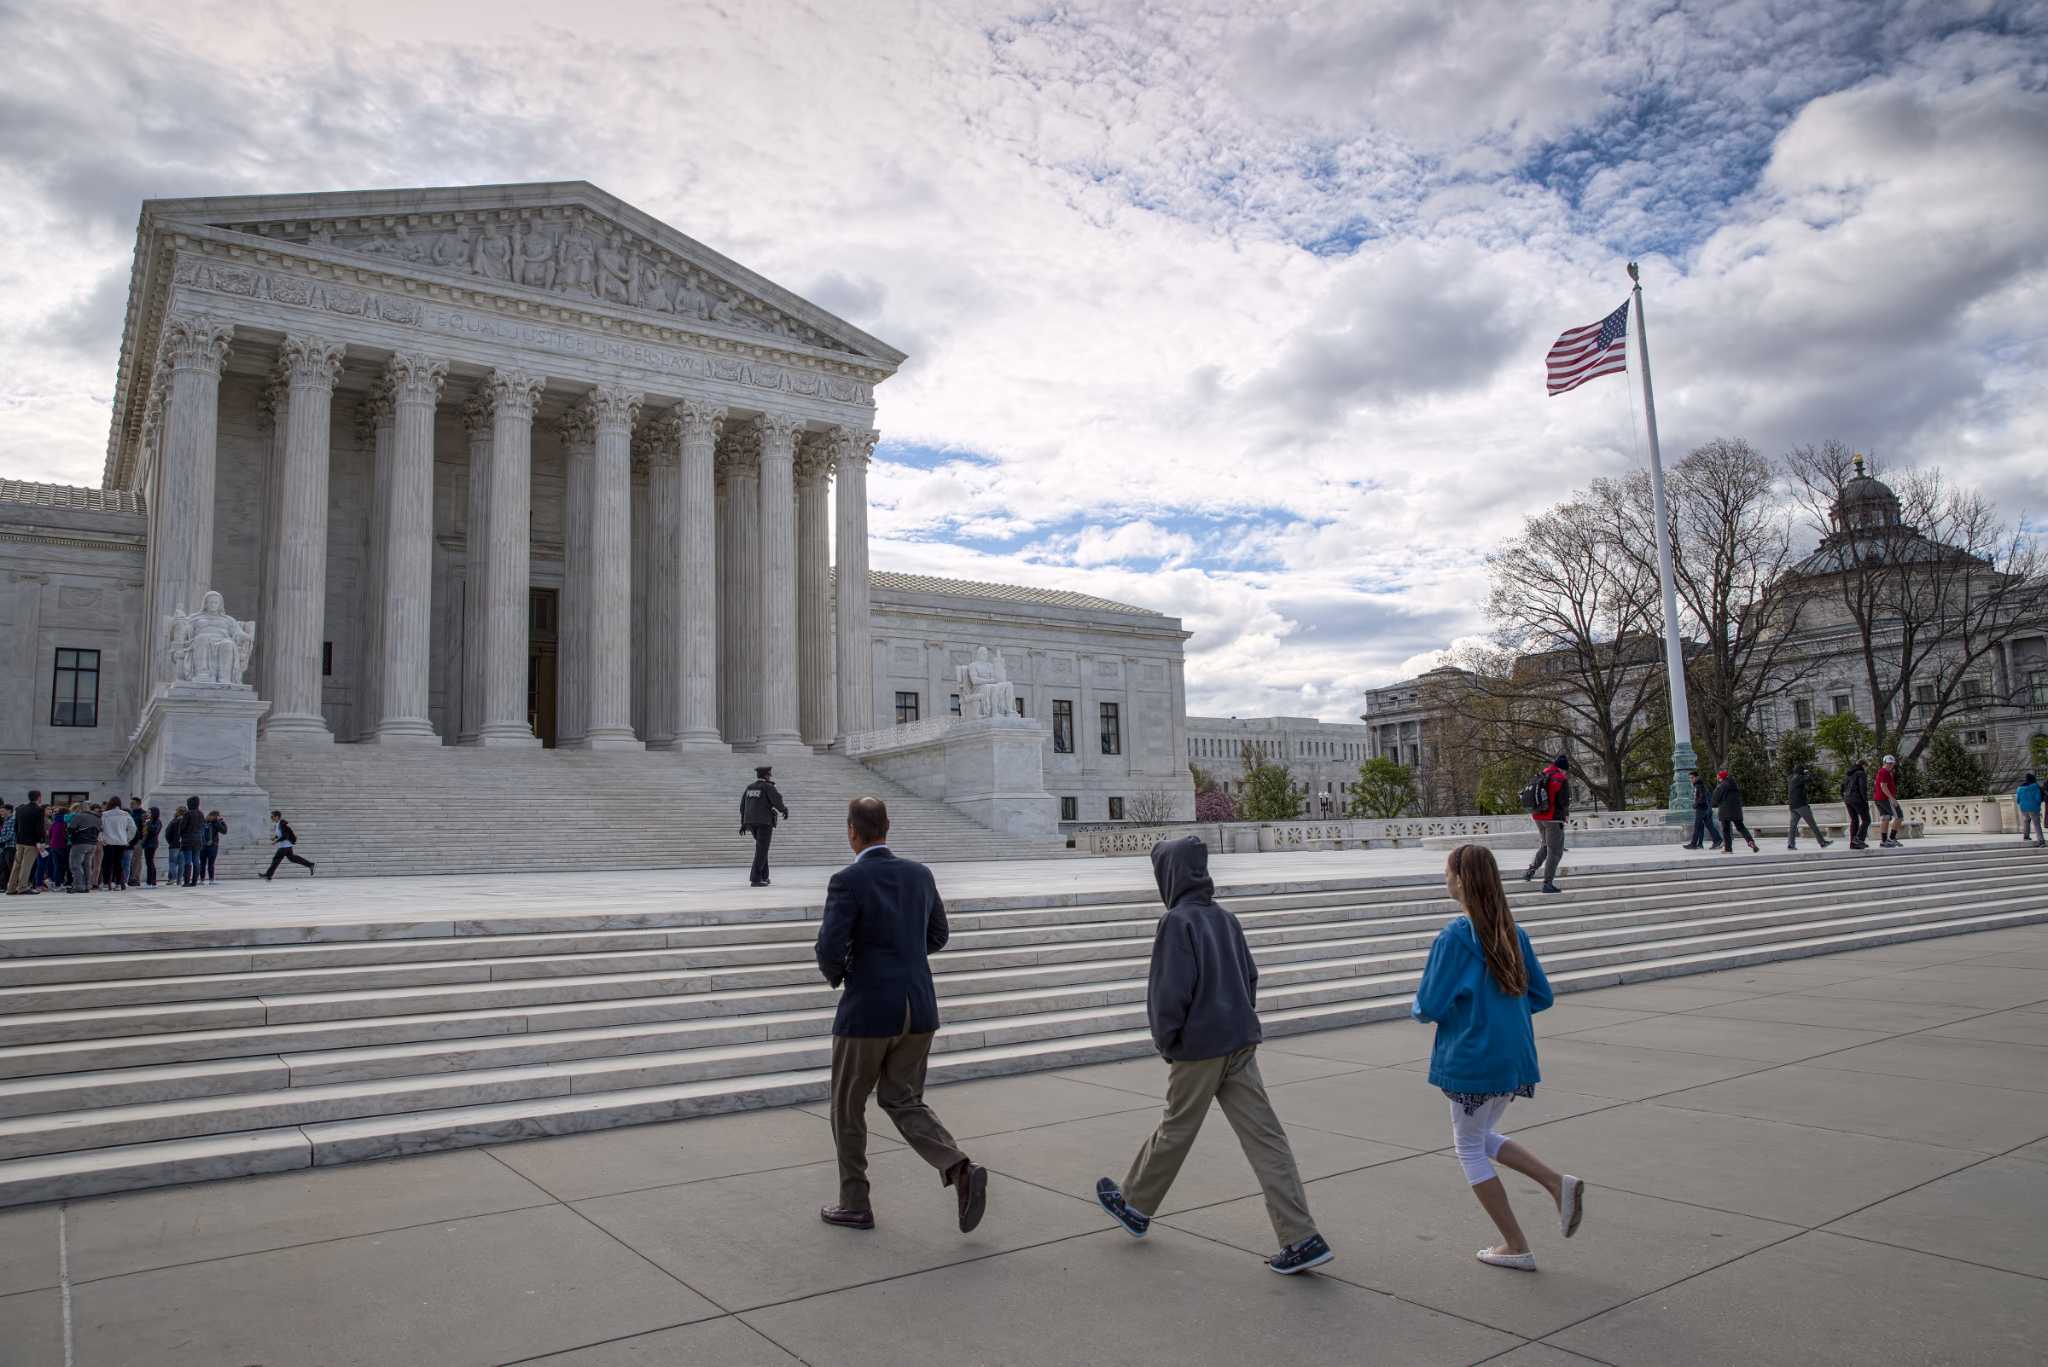 Republicans claim victory after Supreme Court redistricting decision